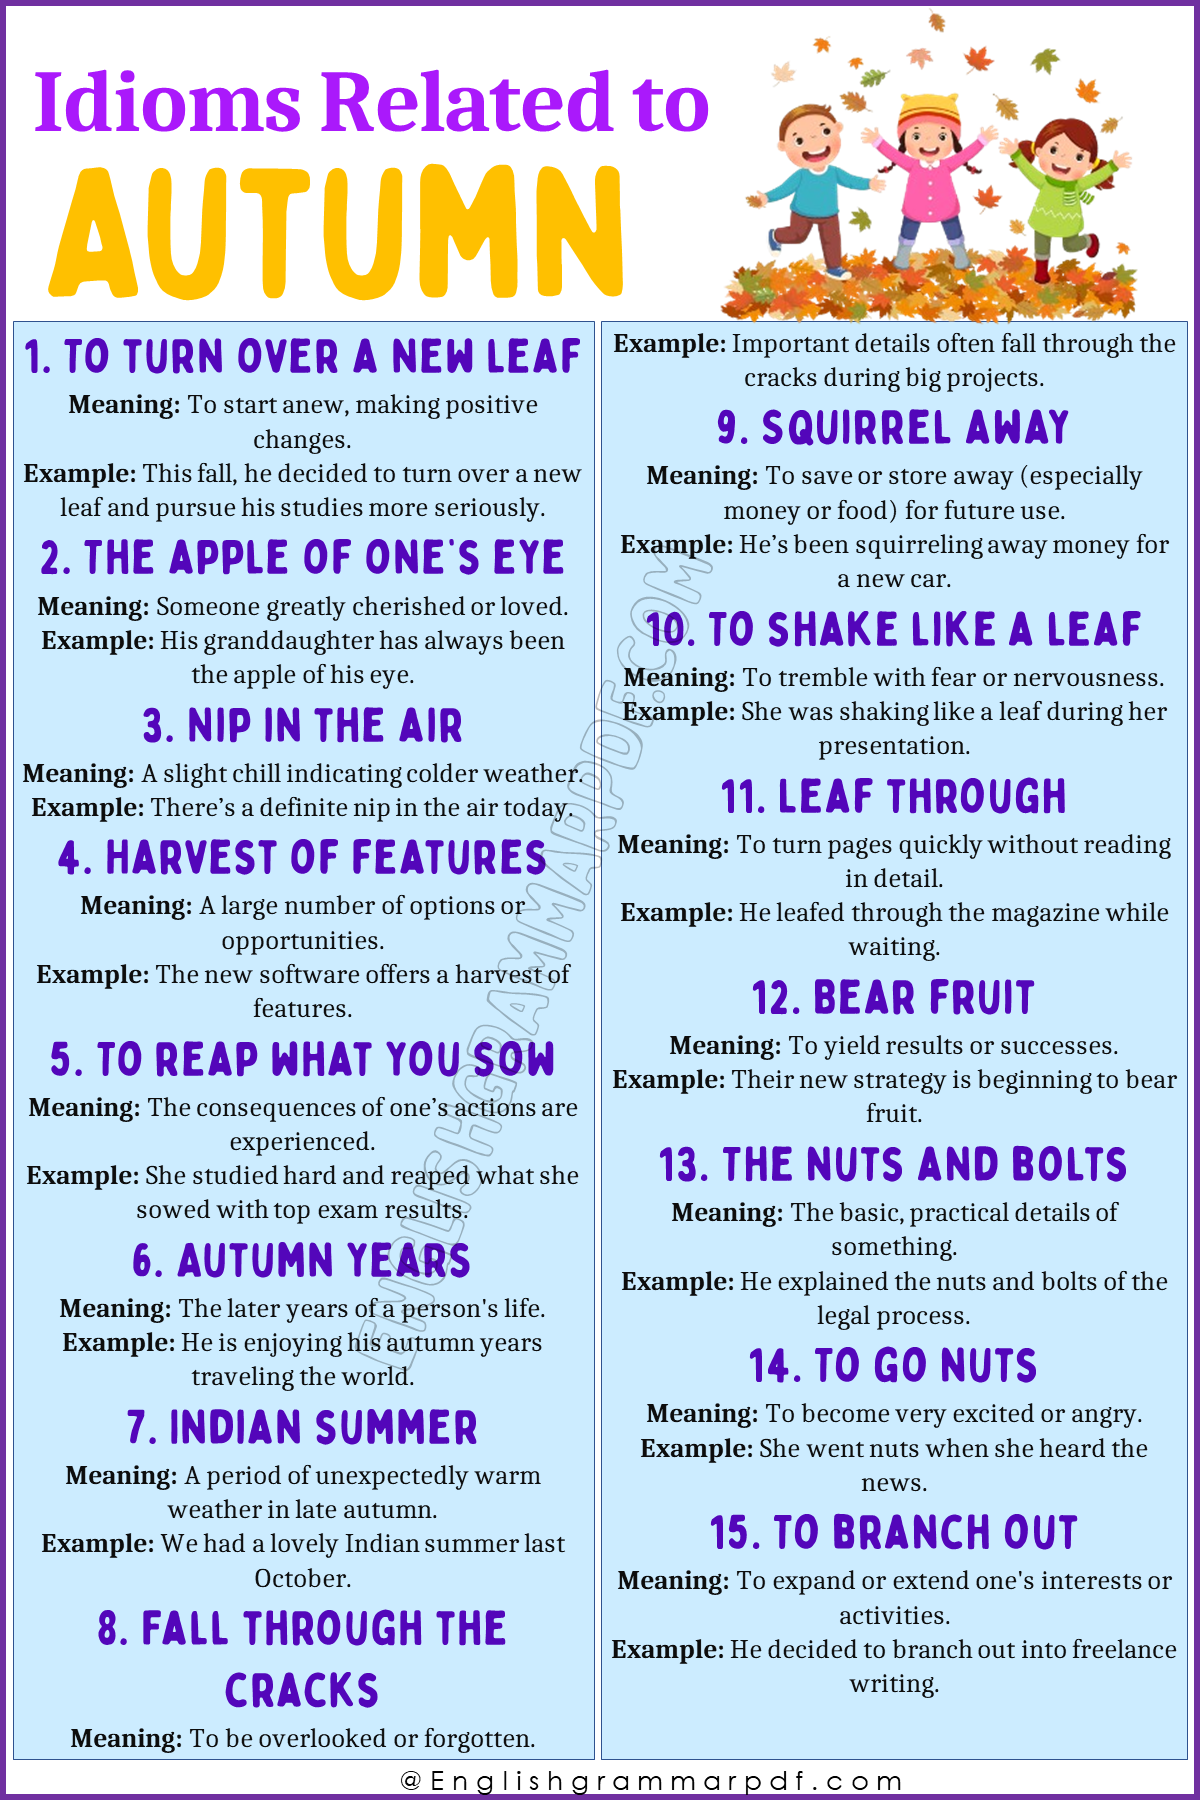 Idioms Related To Autumn